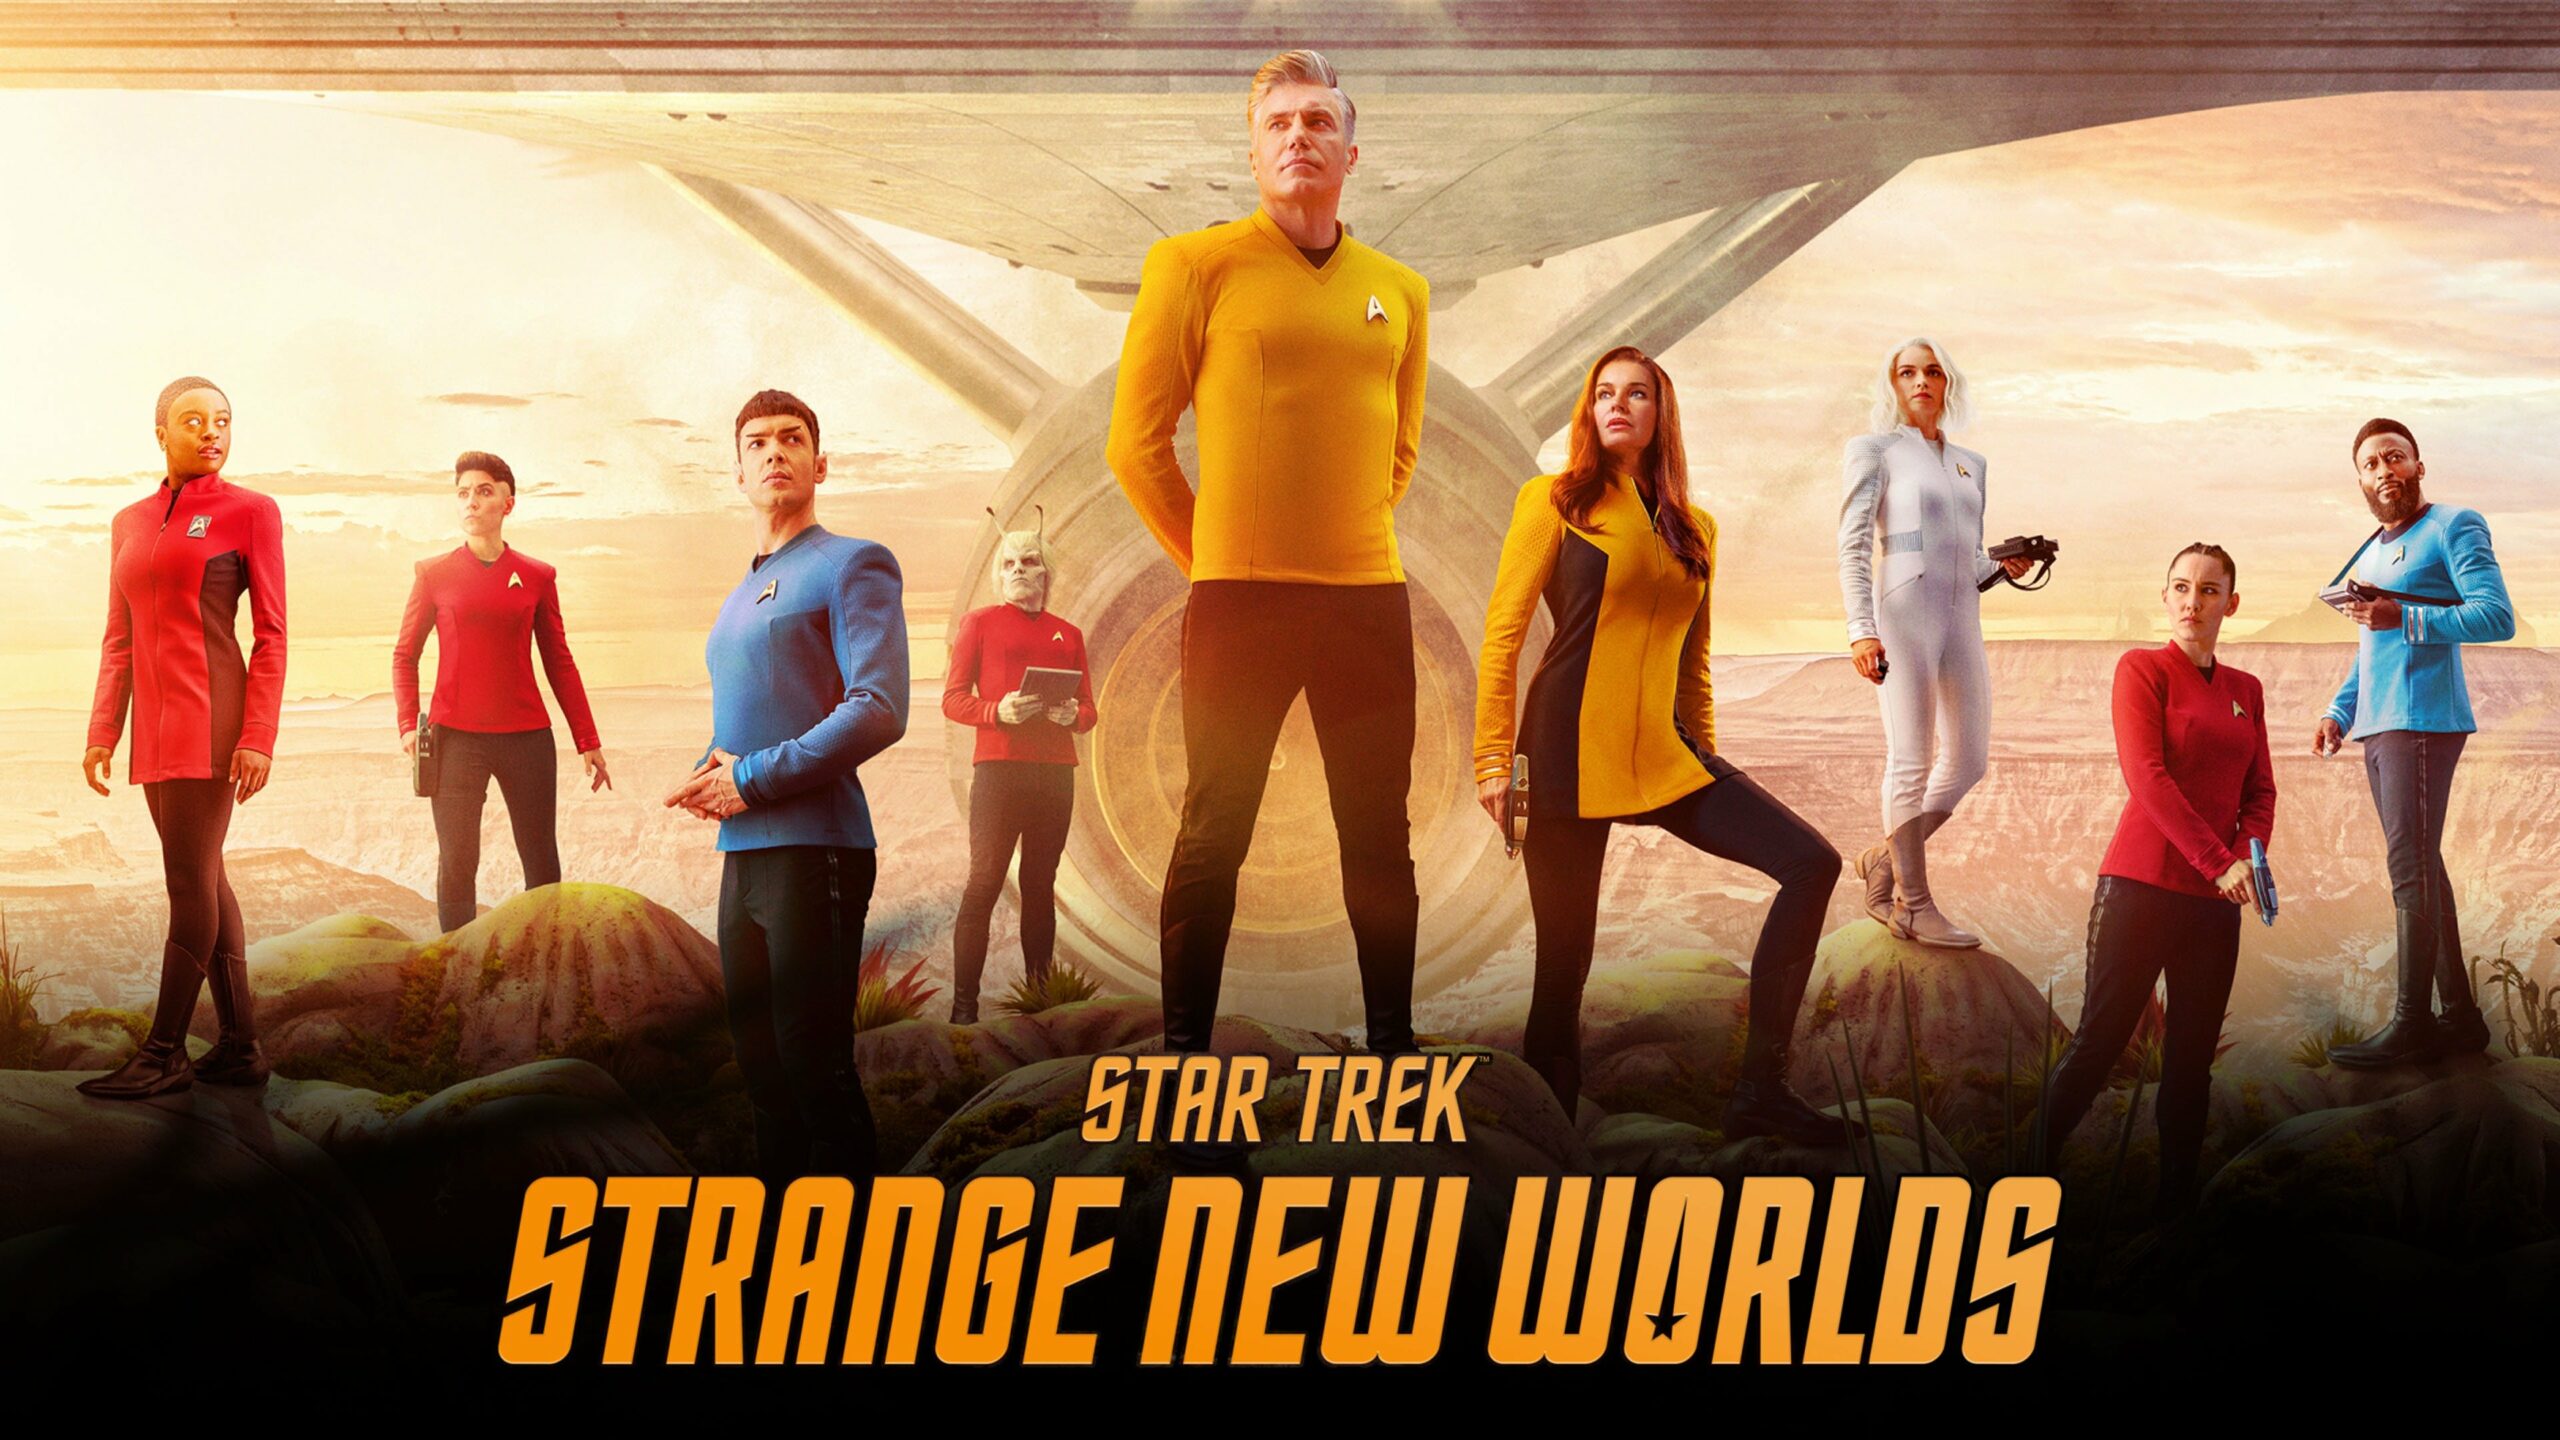 Star Trek: Strange New Worlds Makes the Leap From Paramount+ to CBS